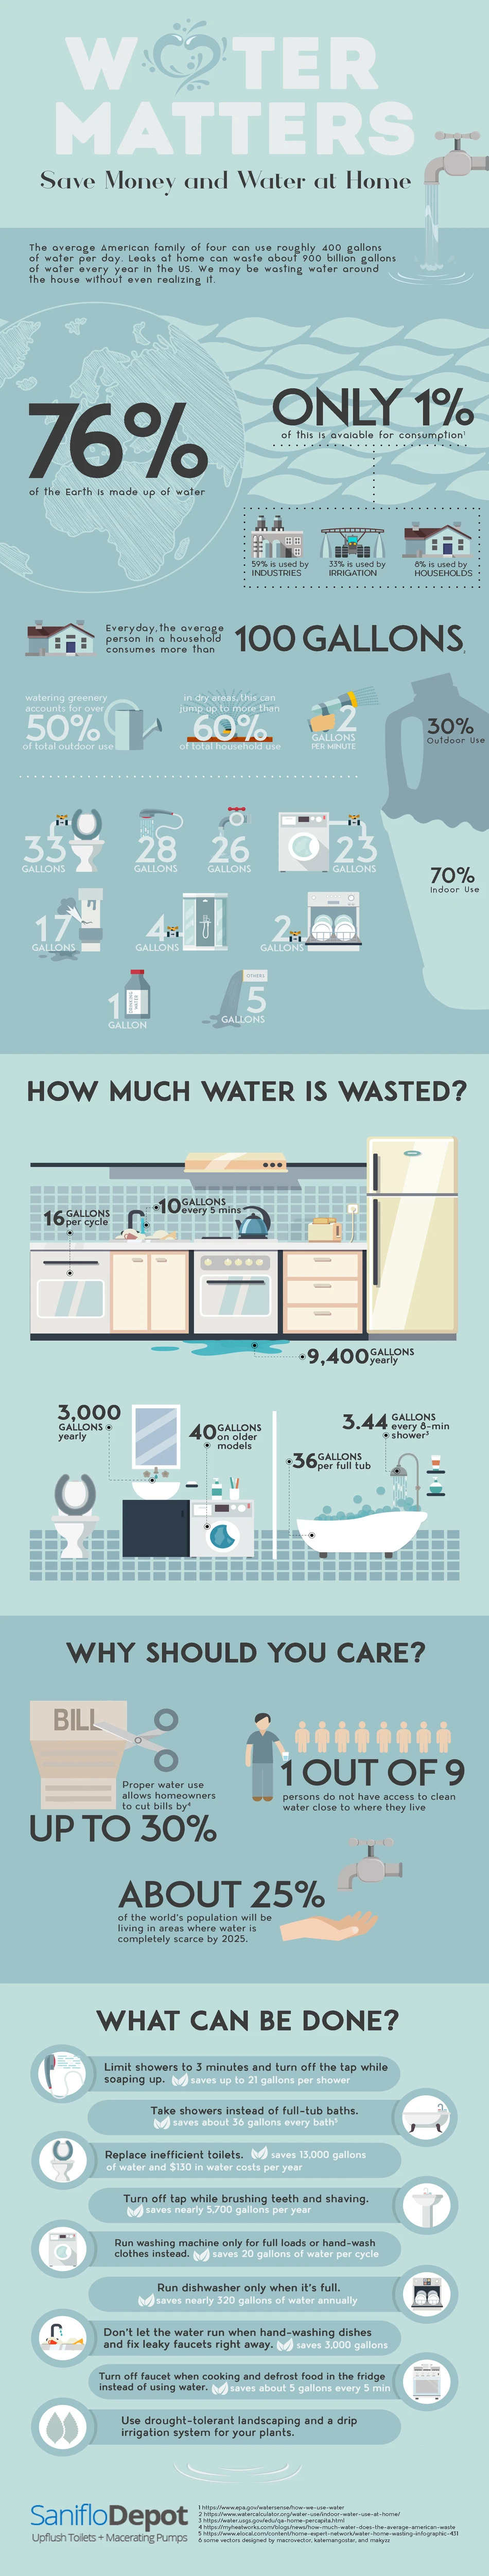 how to save money and water in your home